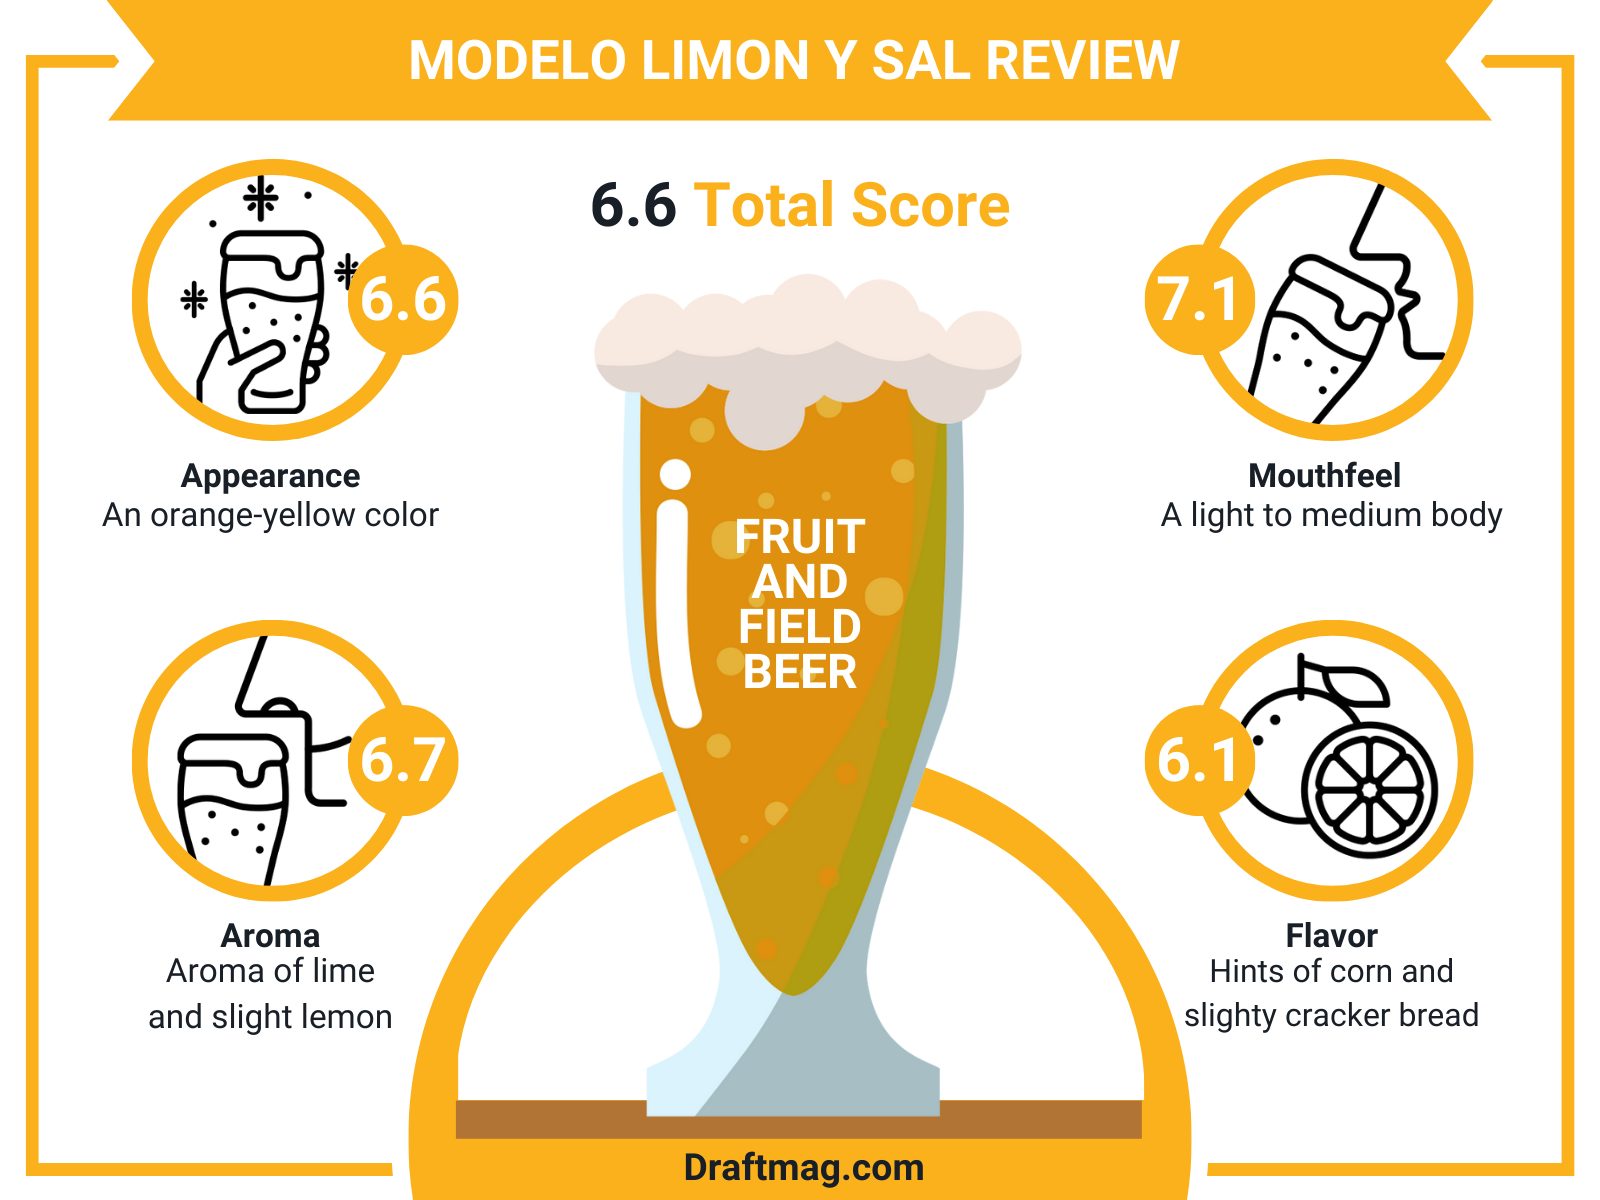 Modelo Limon y Sal Review Infographic